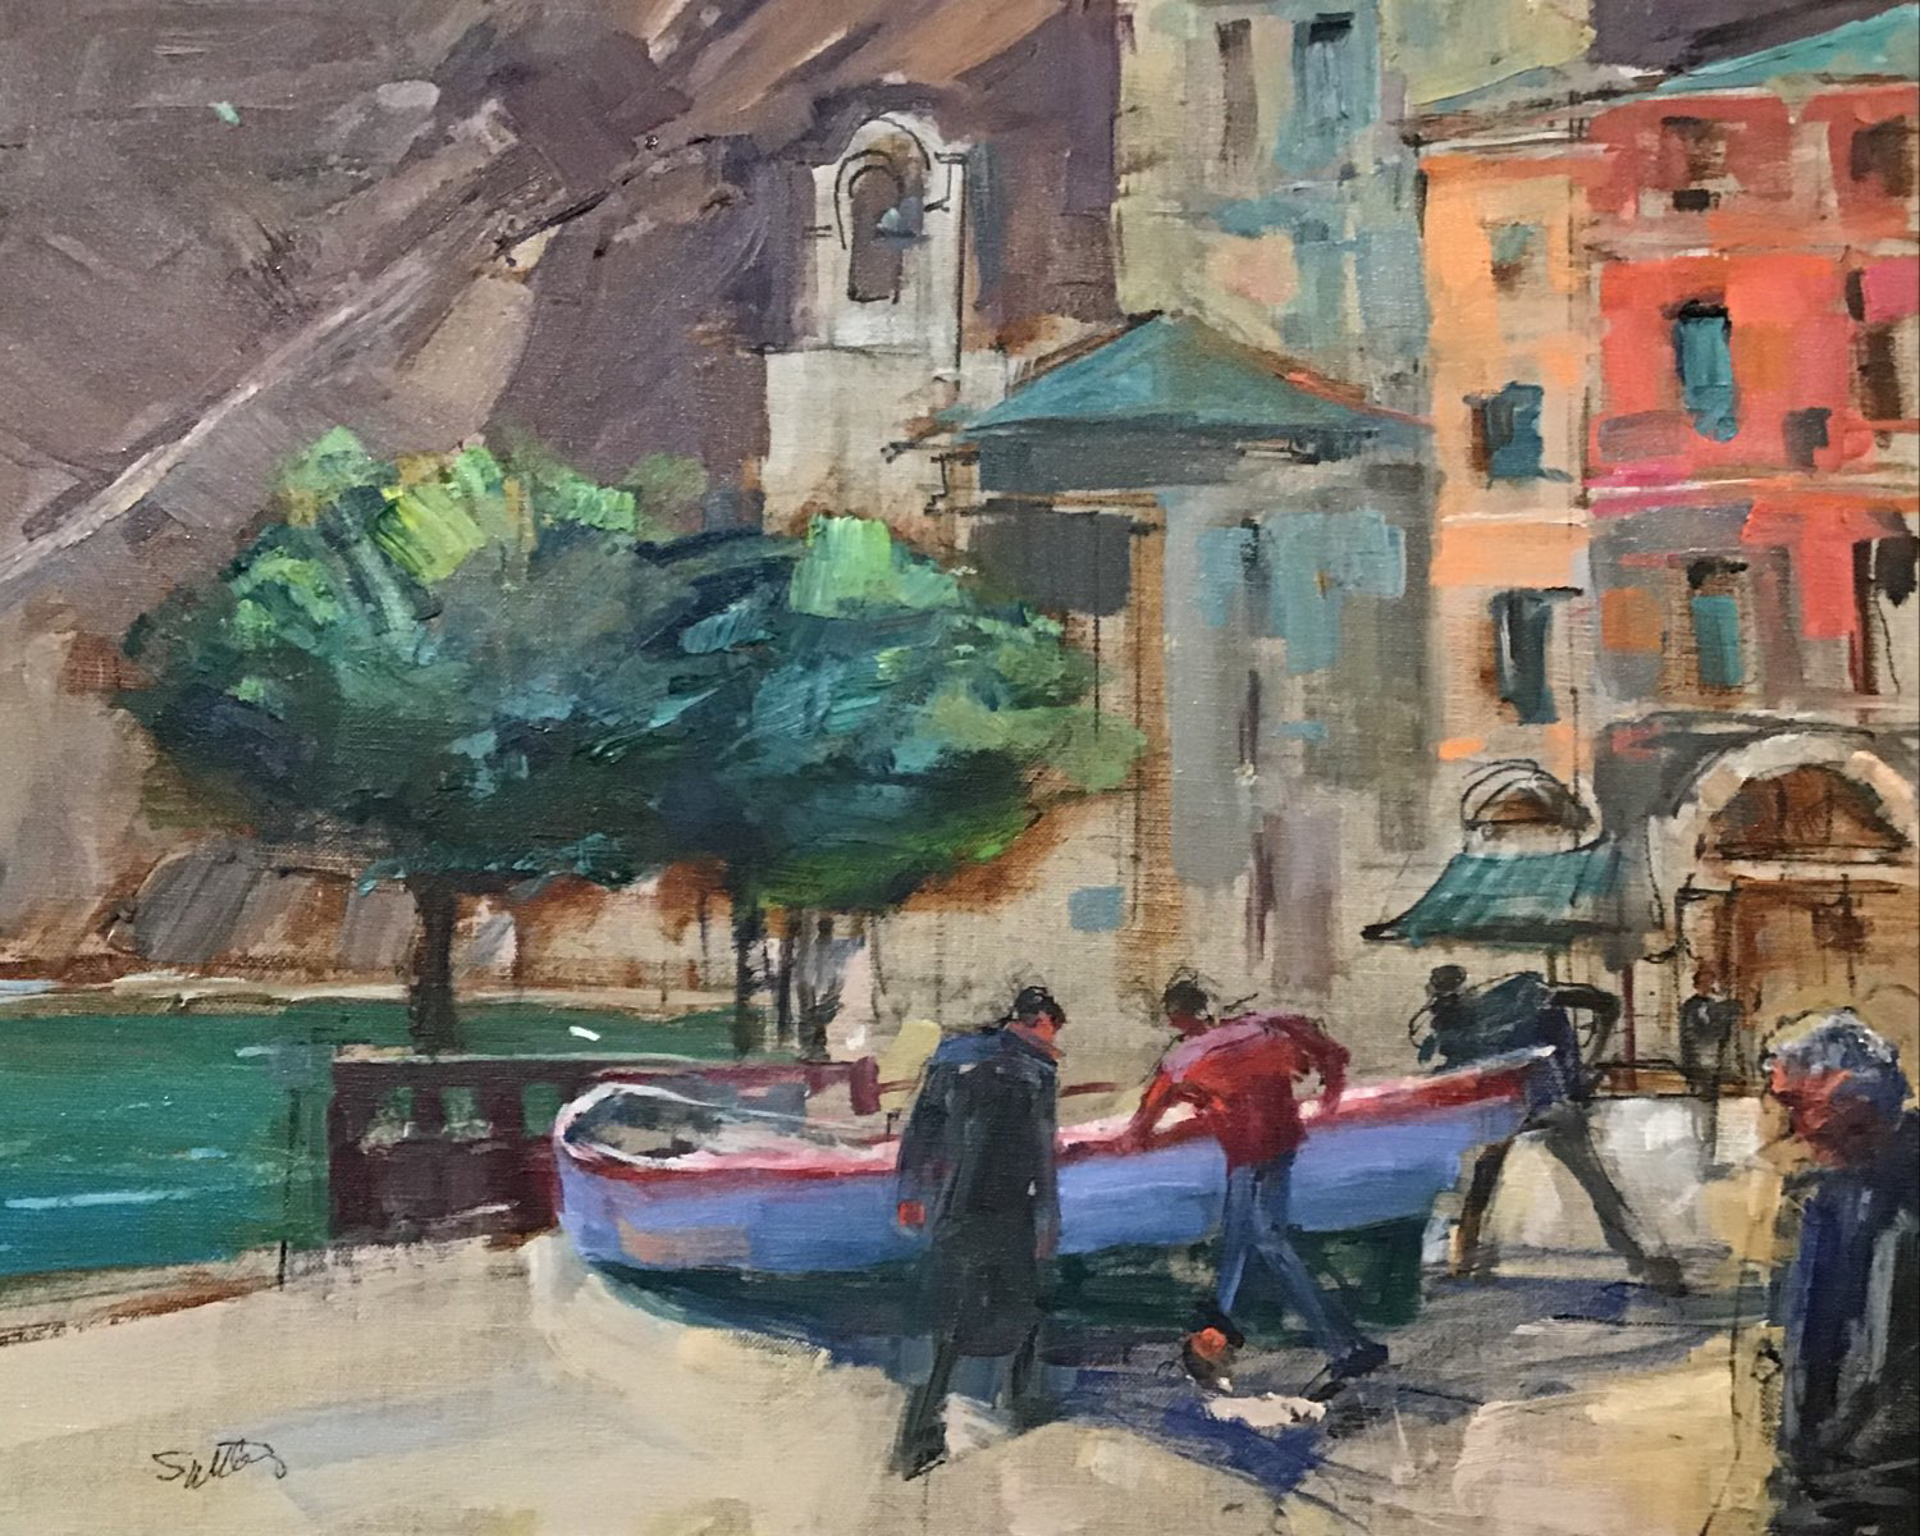 Hauling Out, Liguria by Bill Suttles